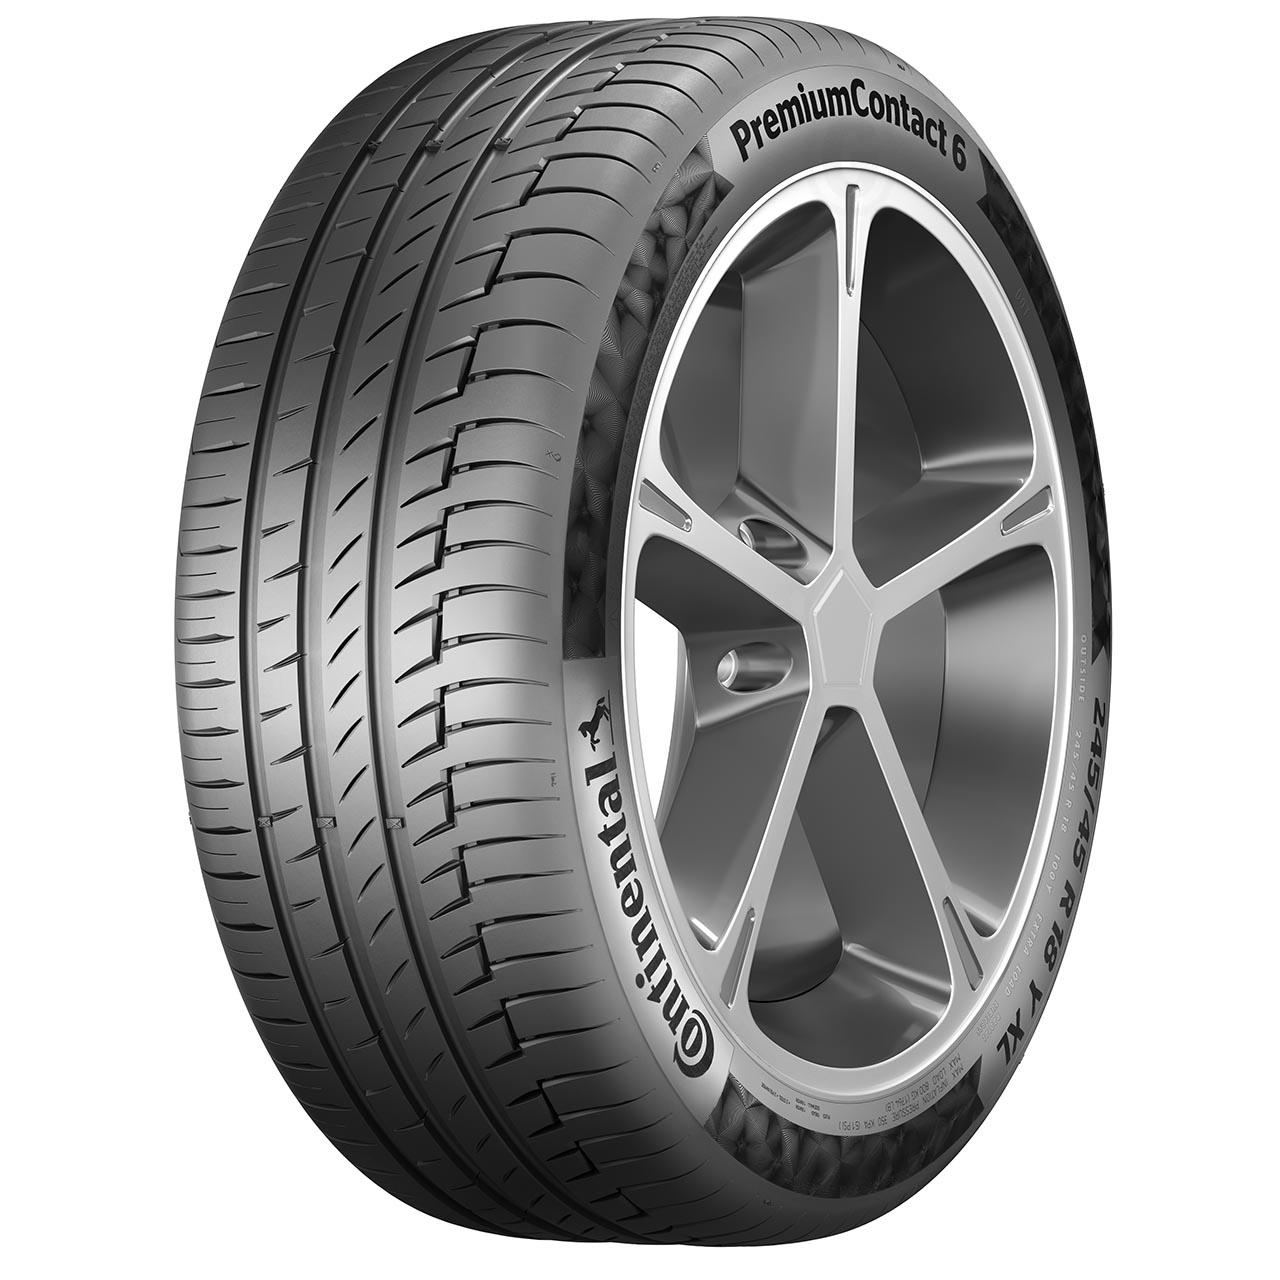 Continental PREMIUMCONTACT 6 245/45R19 102V XL FOR